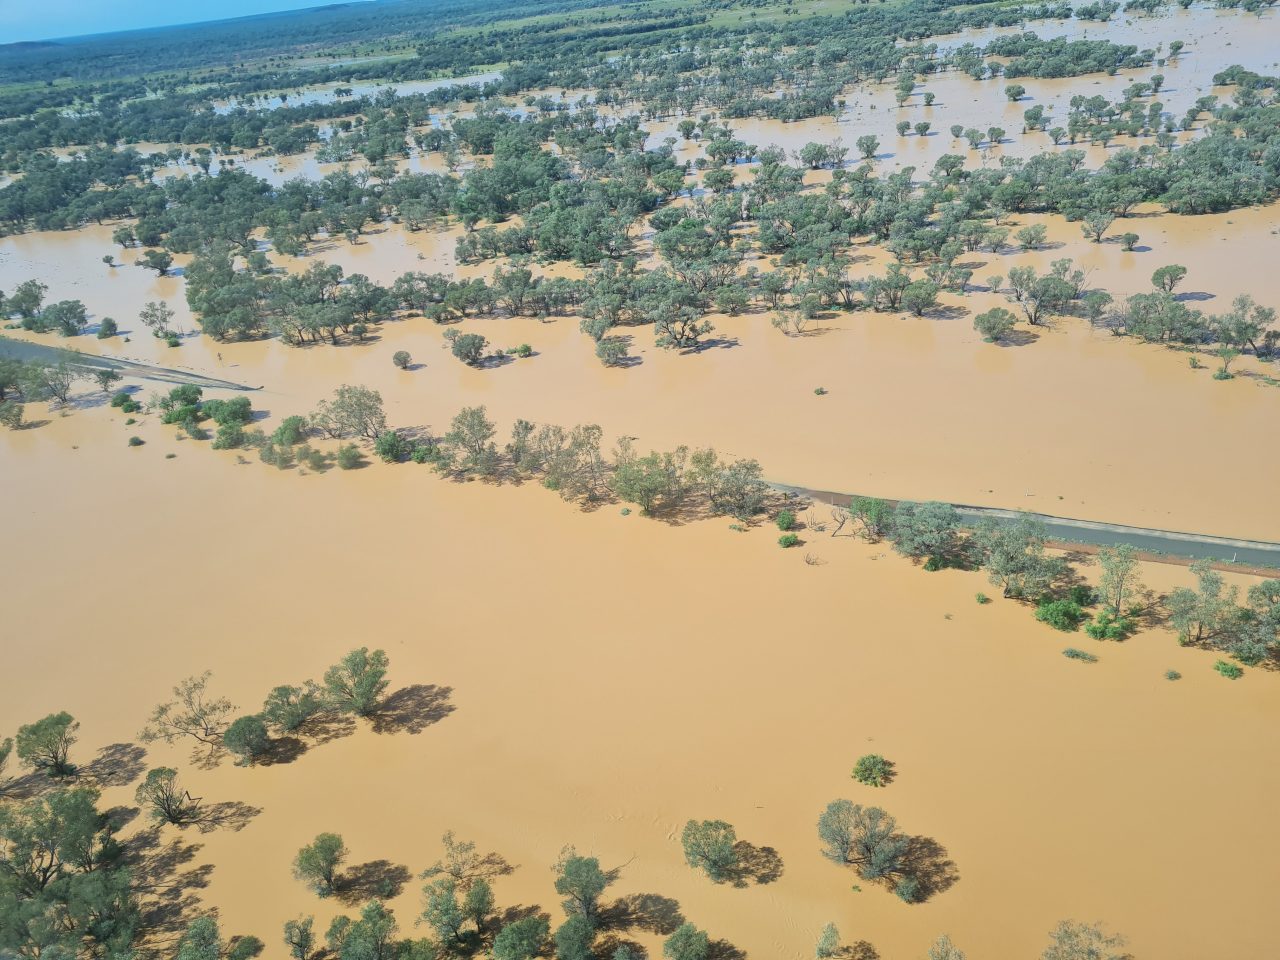 Aerial photo of floodwaters inundating the landscape with orange-brown water and submerging a section of sealed road making passing impossible . Trees on the floodplain are also in the expansive flood waters